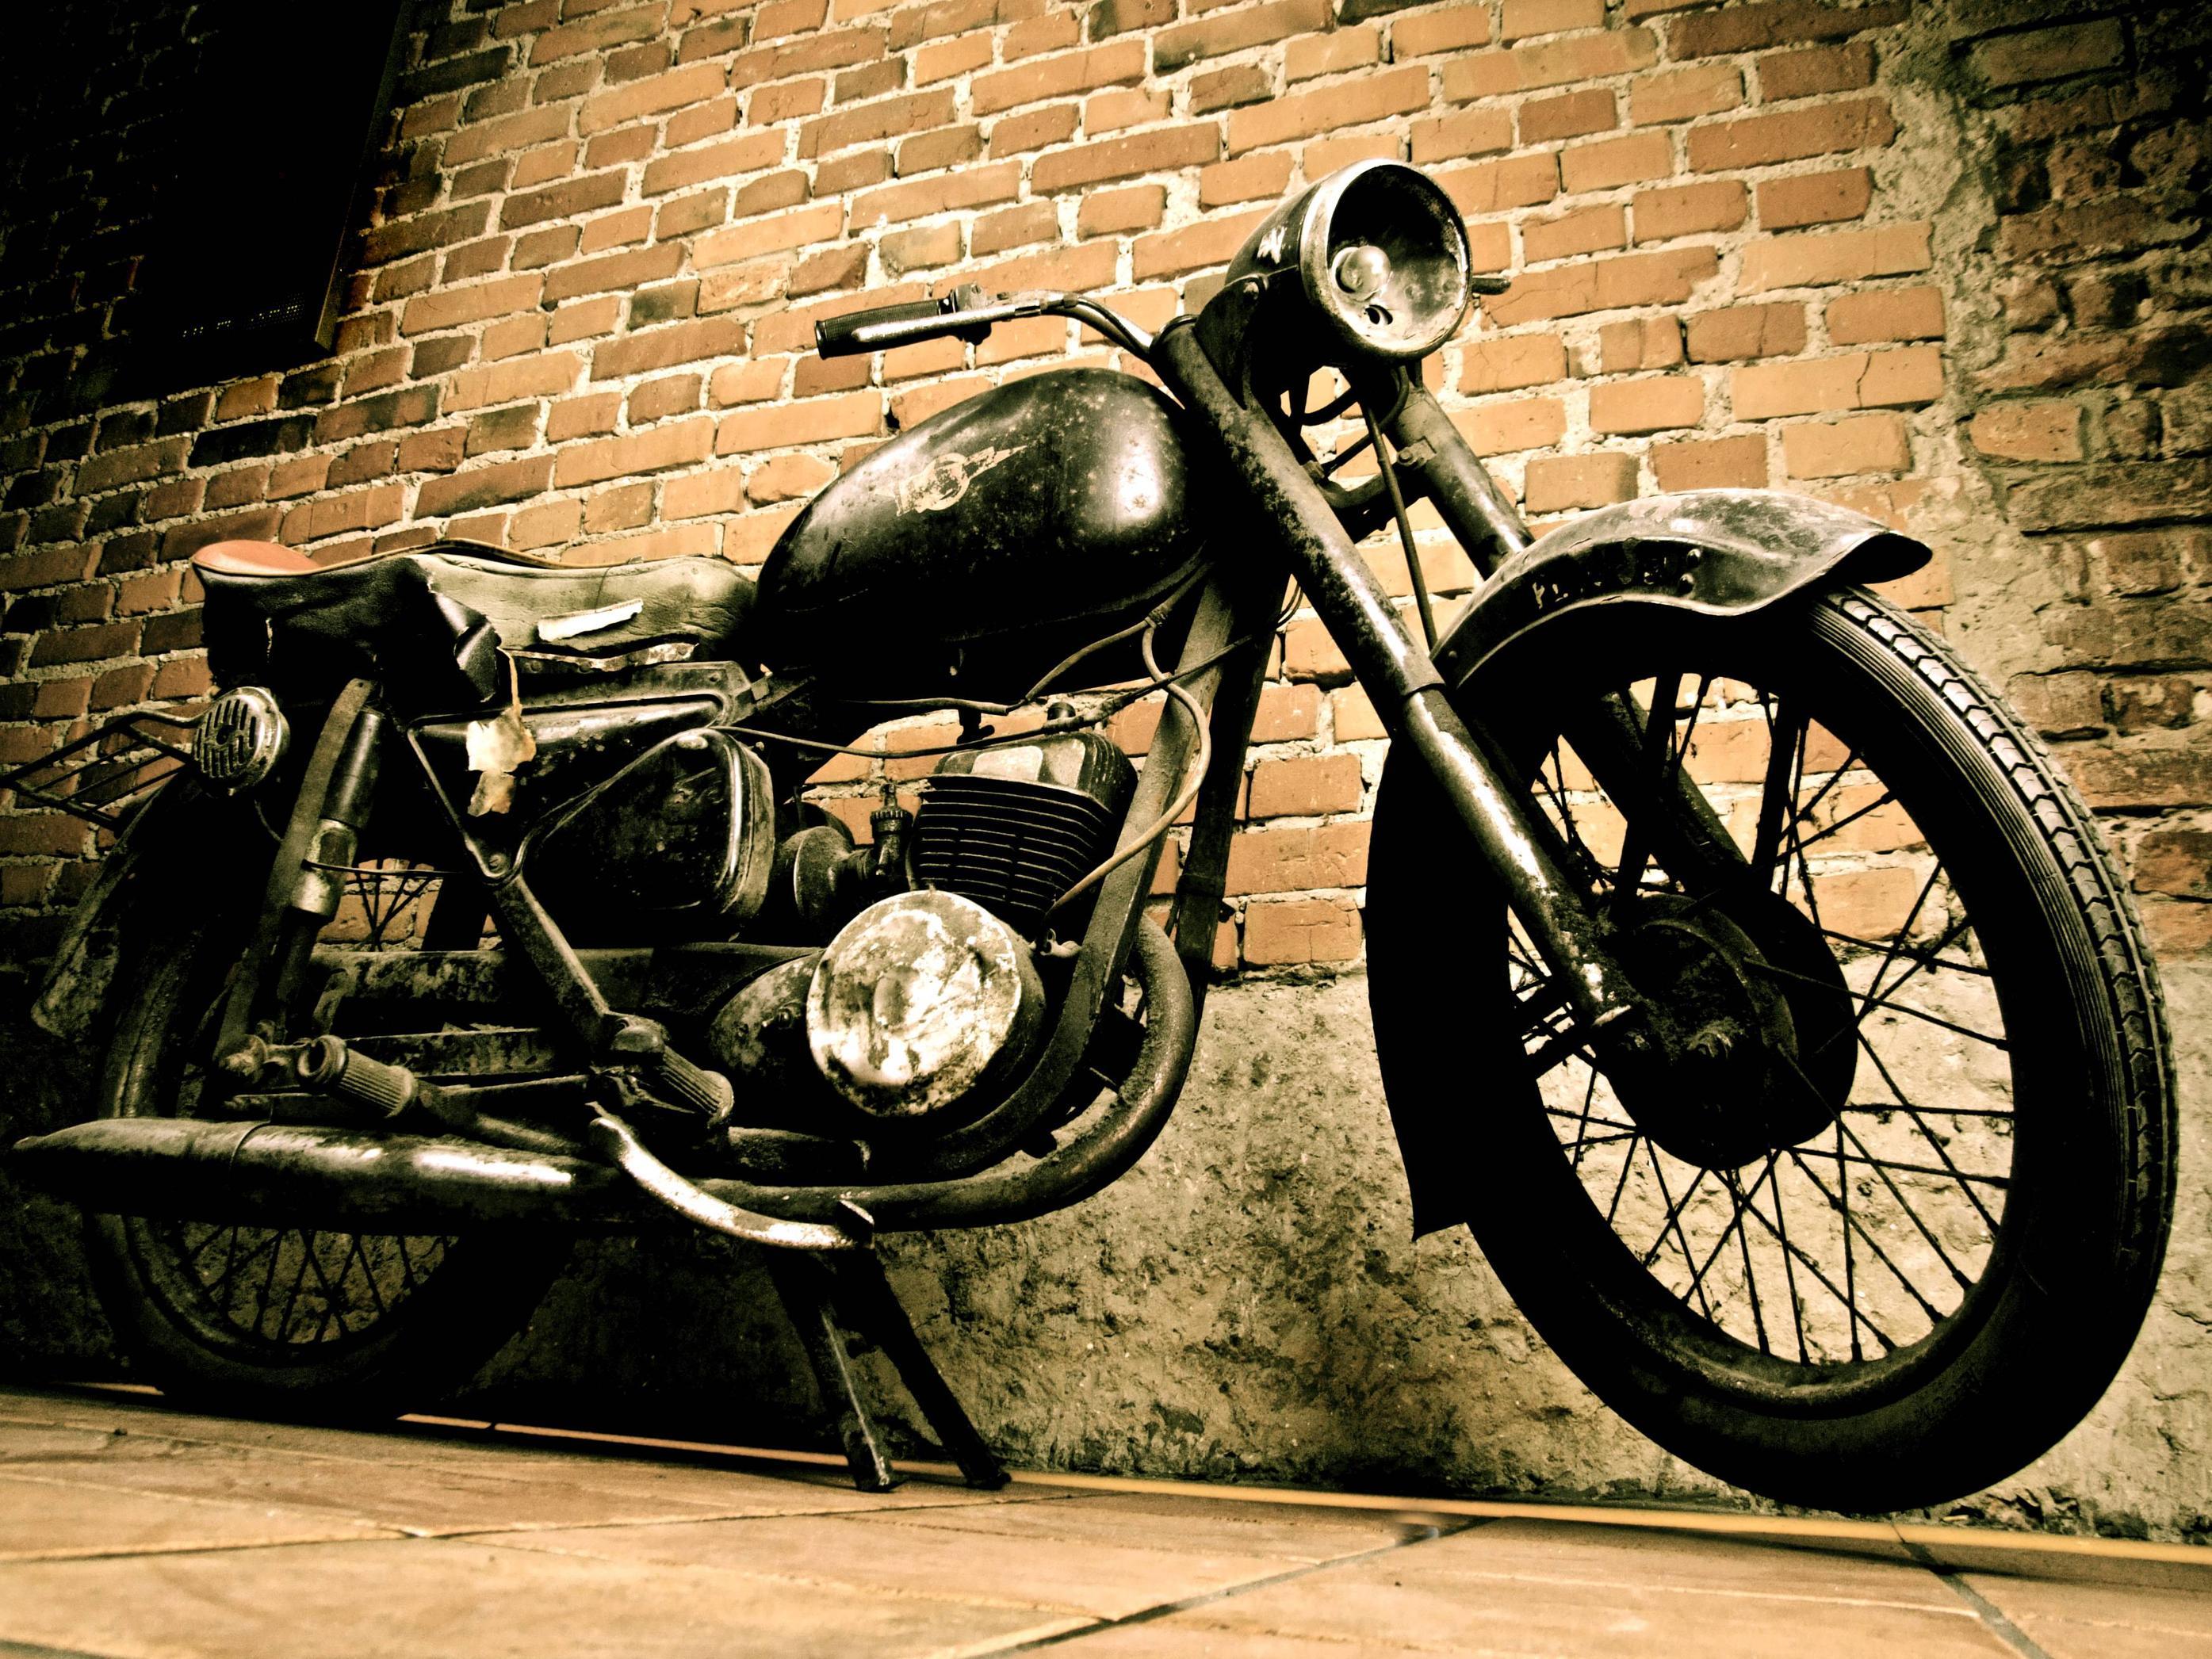 Motorcycle clipart desktop background and in color